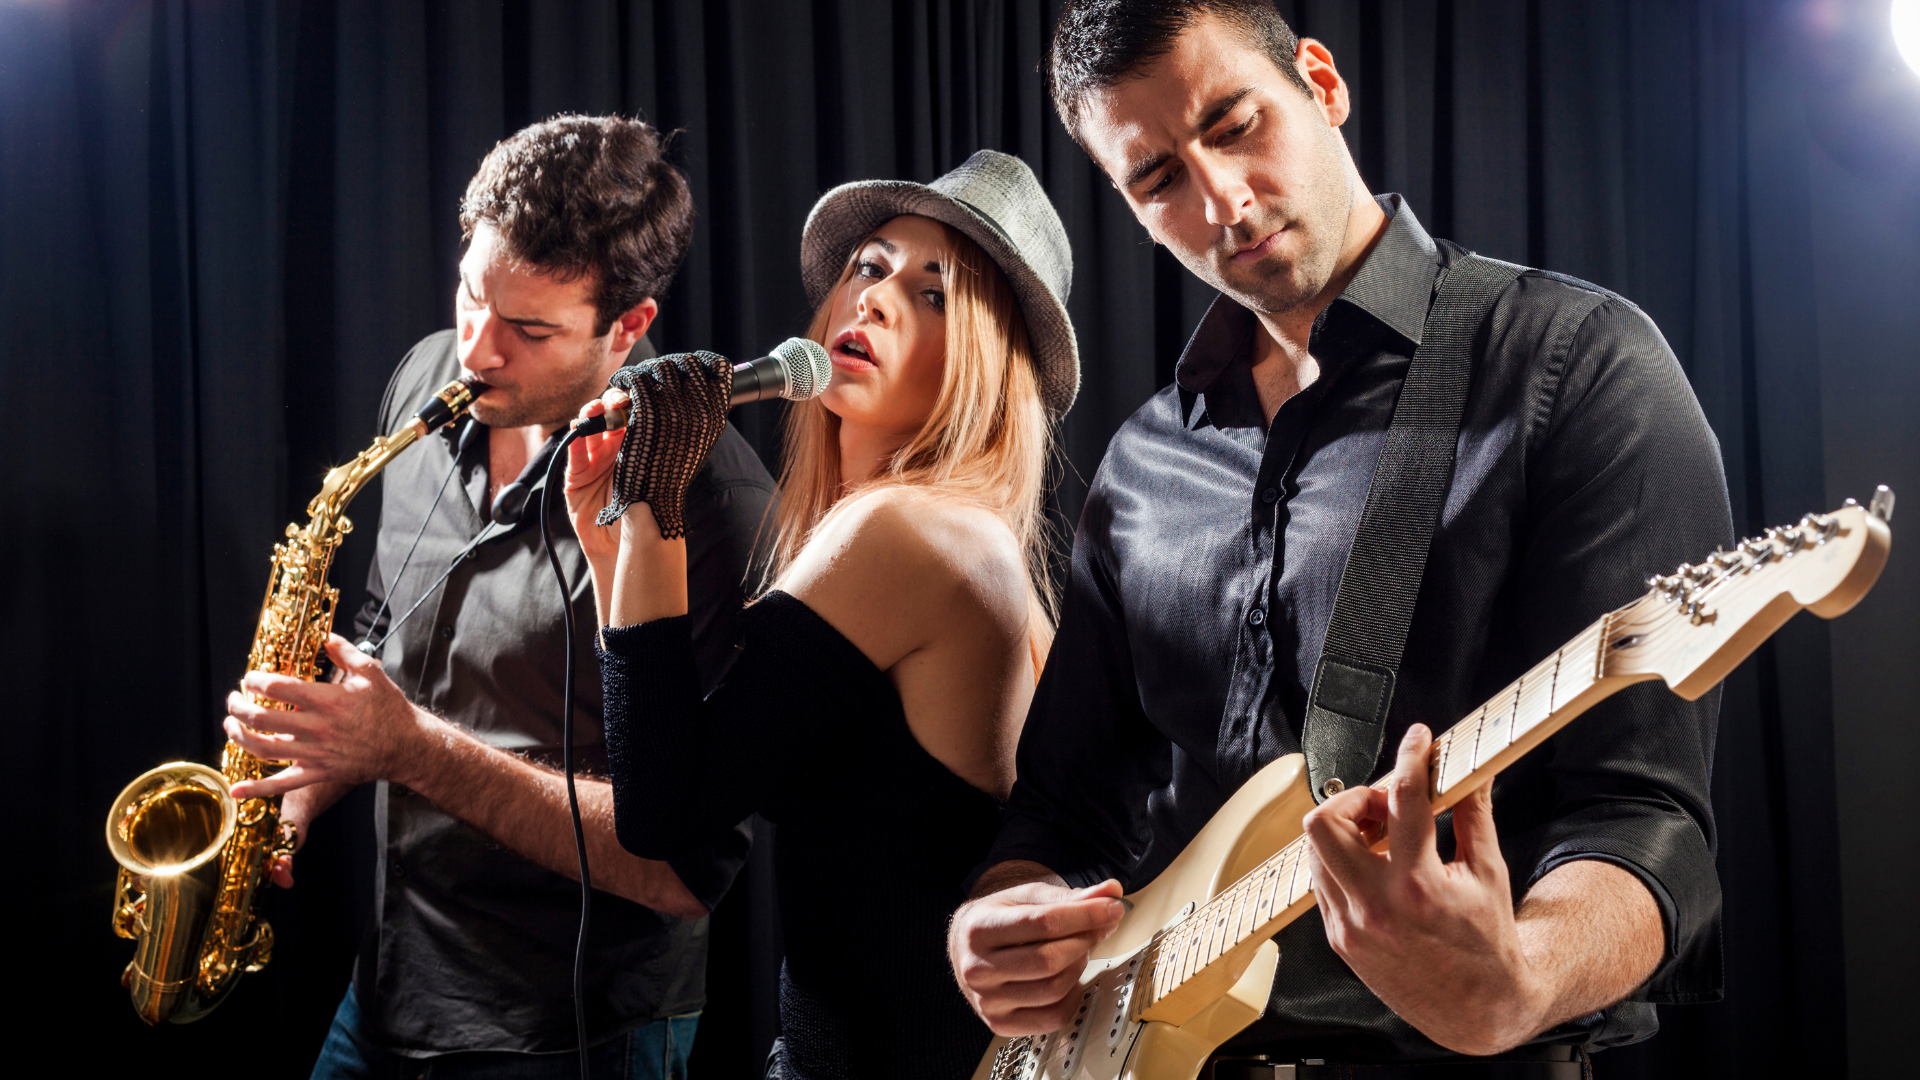 The Best Tribute Bands To Book For Your Event